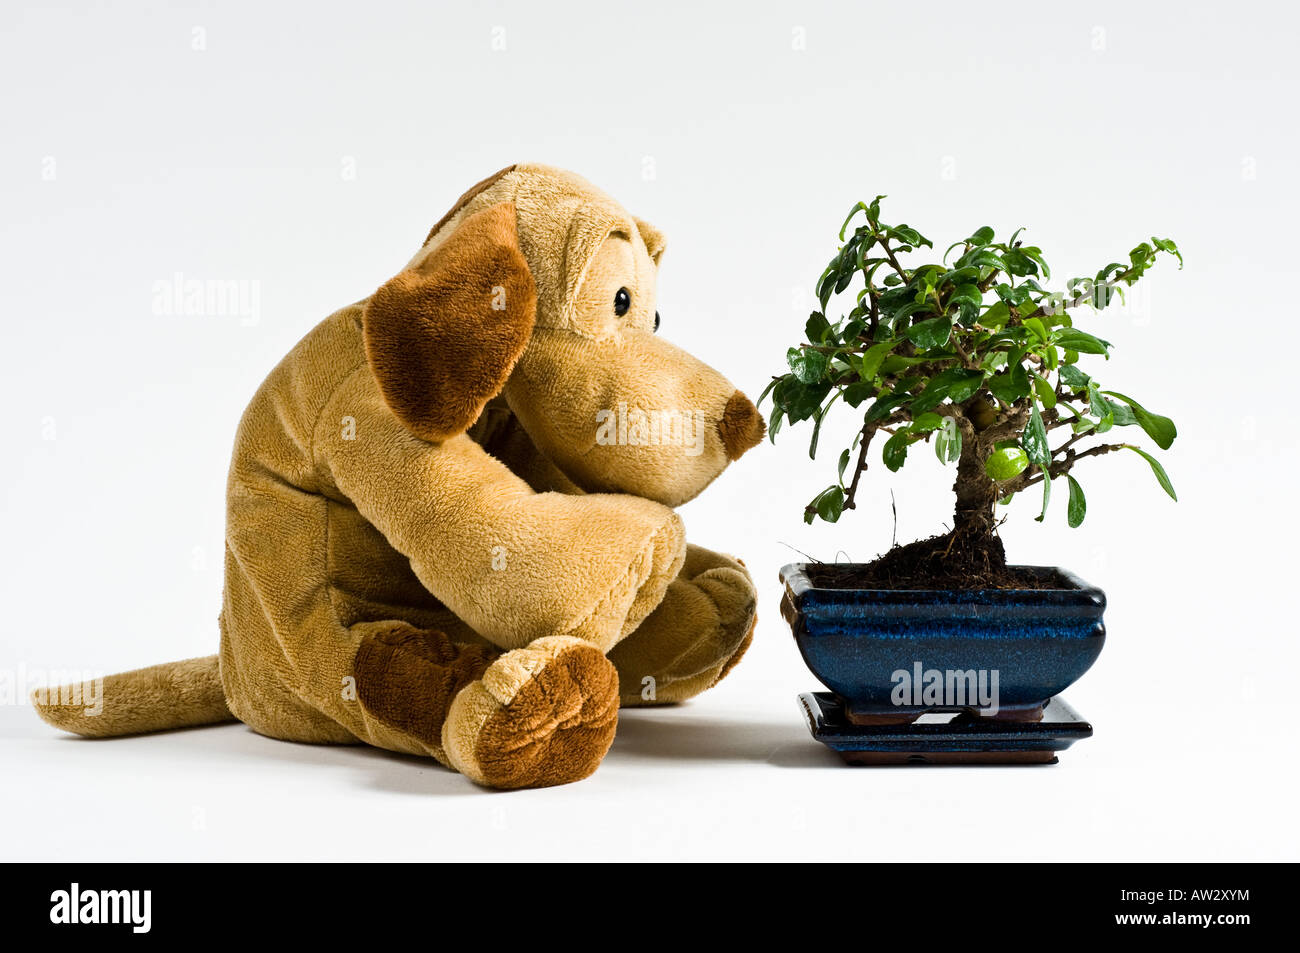 brown stuffed toy dog sitting and watching a small Bonzi tree in a blue pot with tray Stock Photo